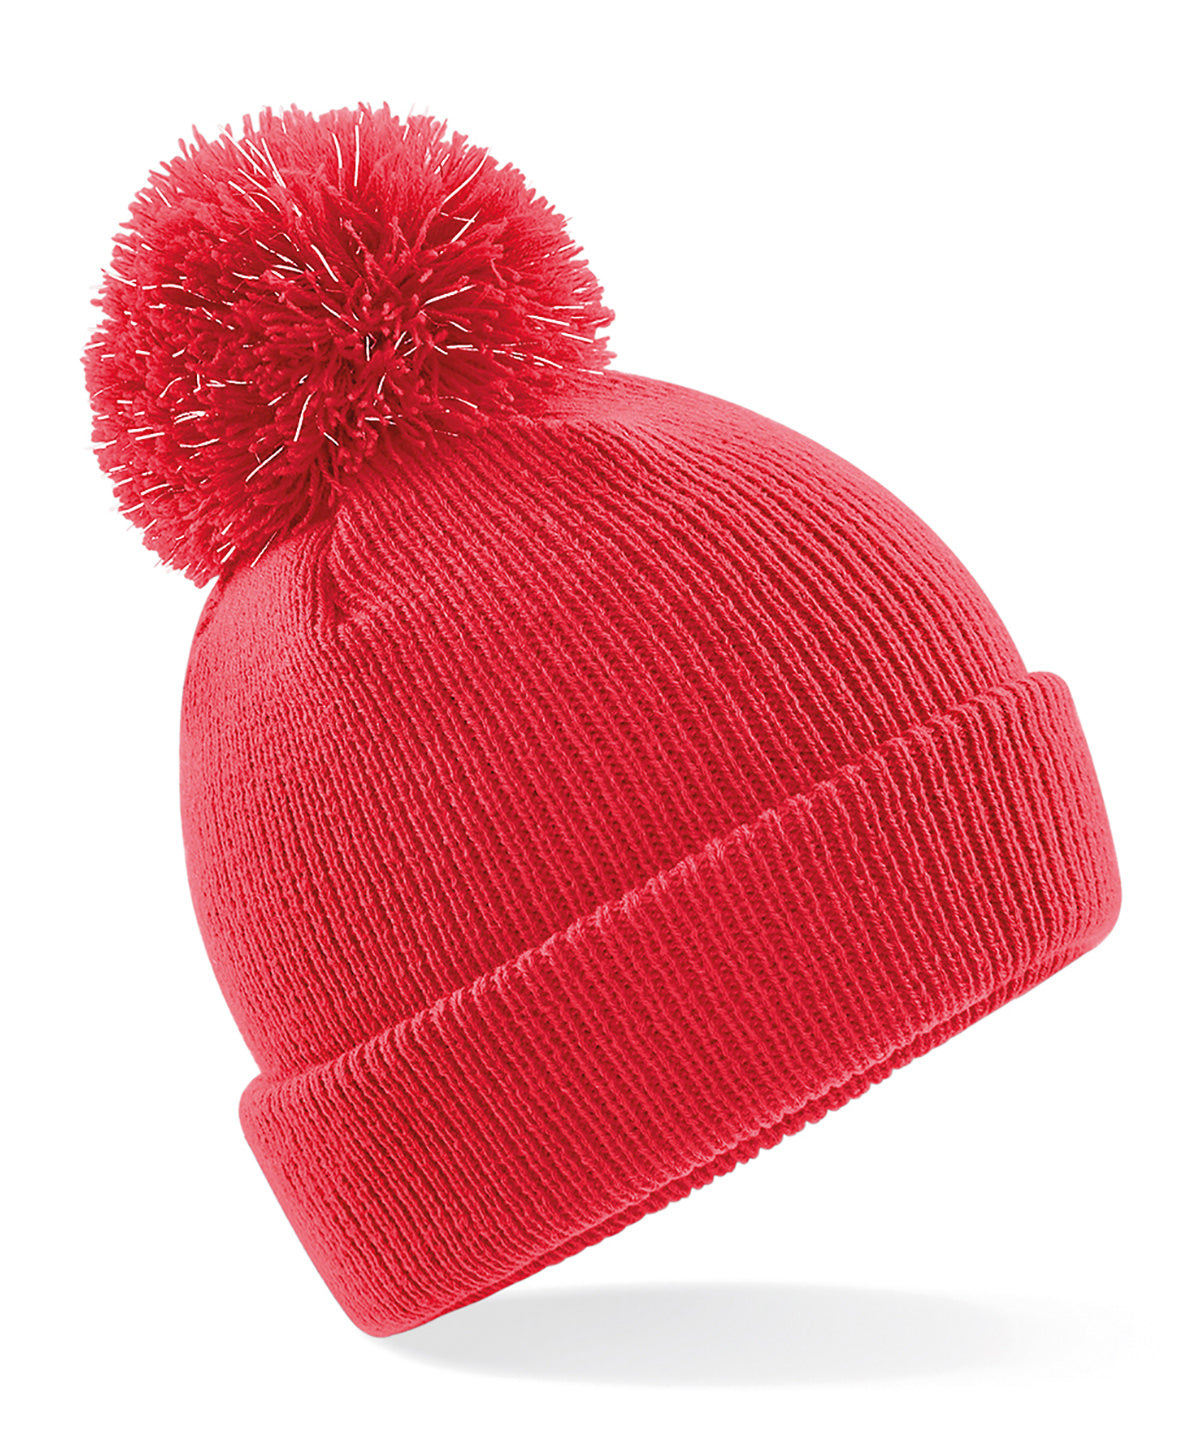 Personalised Hats - Bright Red Beechfield Junior reflective bobble beanie